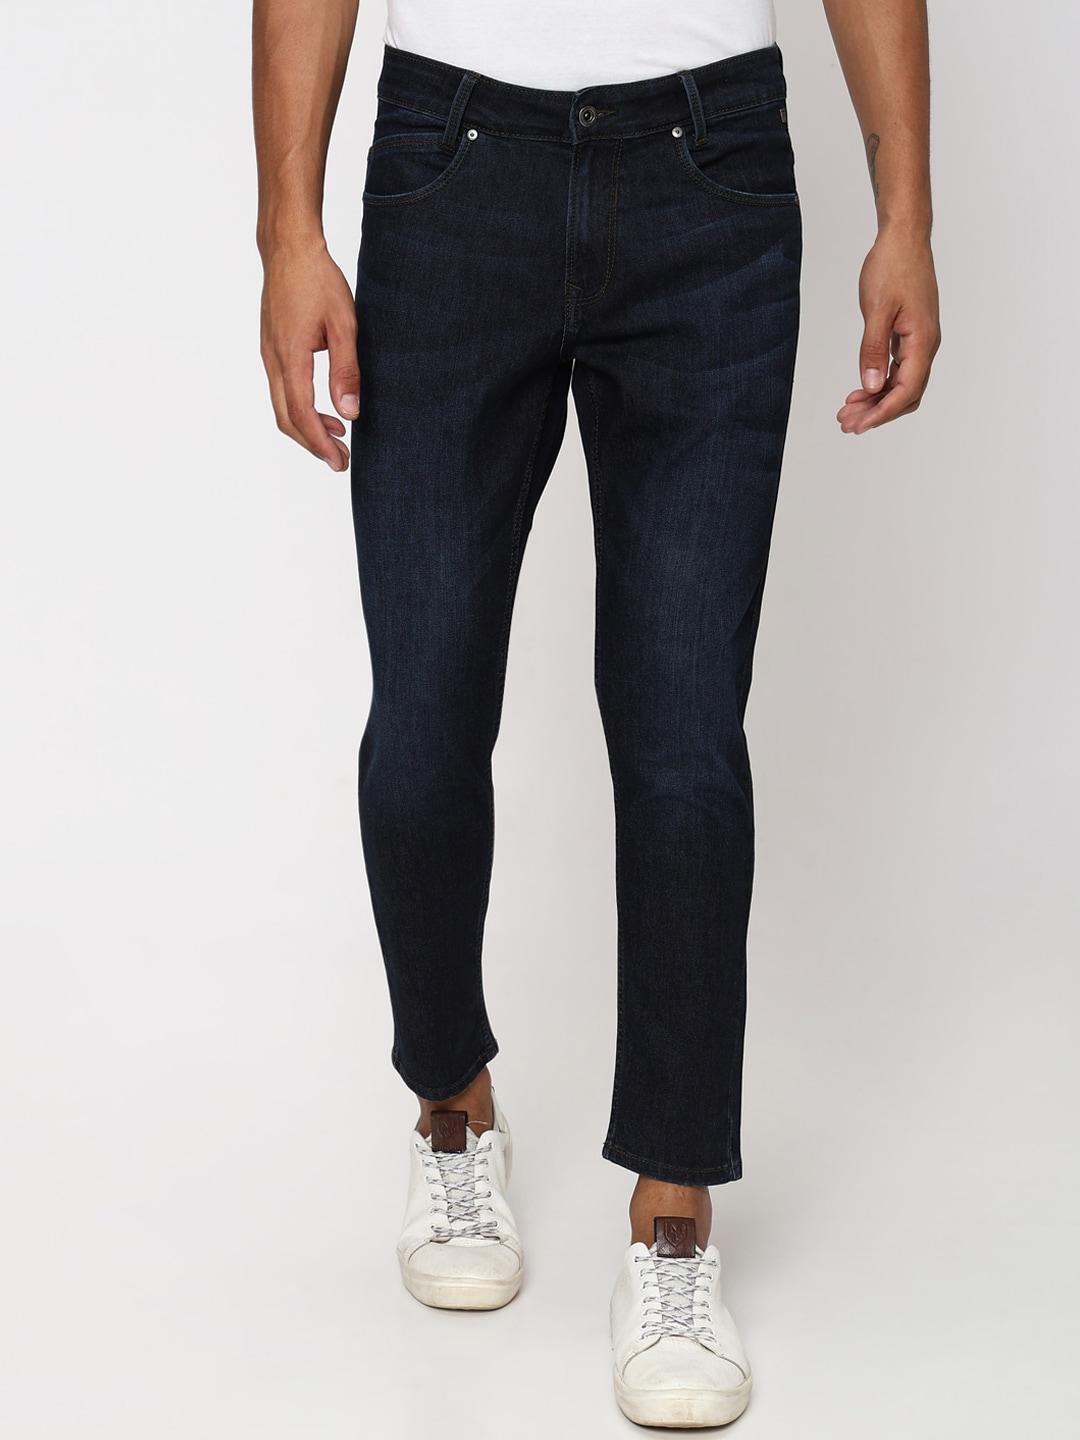 mufti-men-tapered-fit-mid-rise-look-stretchable-jeans